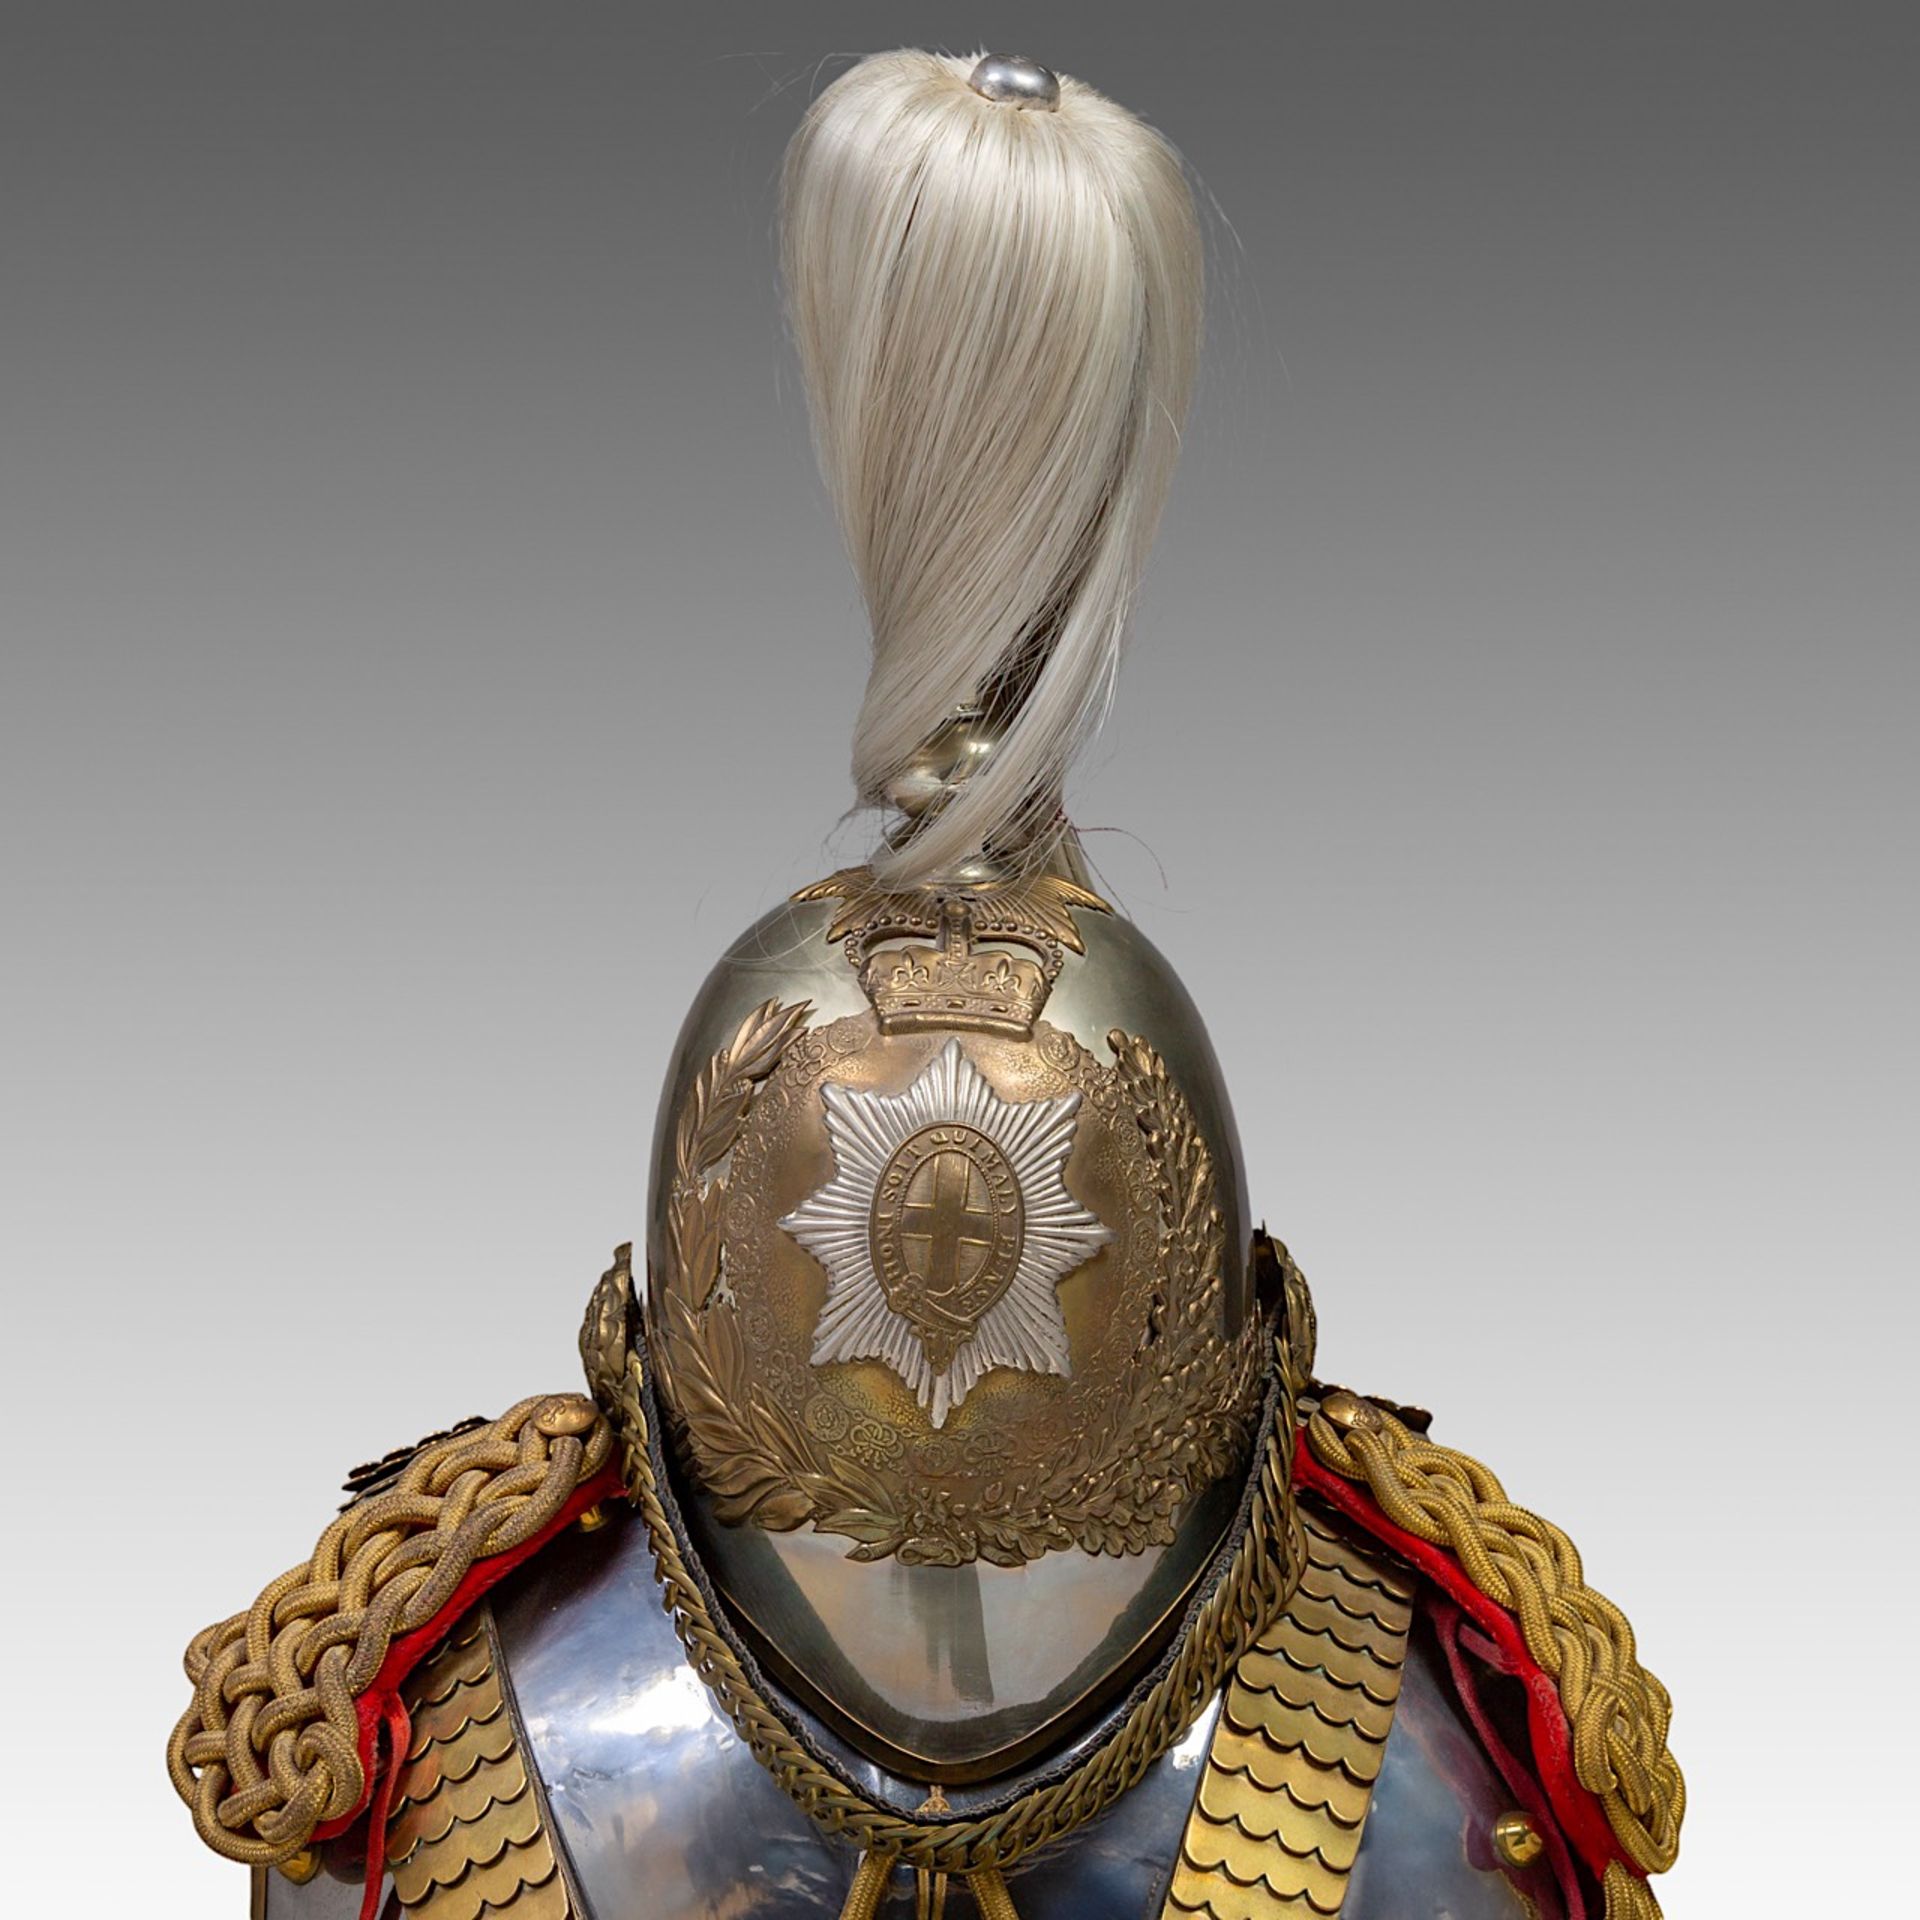 cuirass and helmet of the Royal Horse guards, metal and brass,1952 (Eliabeth II) 88 x 36 x 44 cm. (3 - Bild 6 aus 6